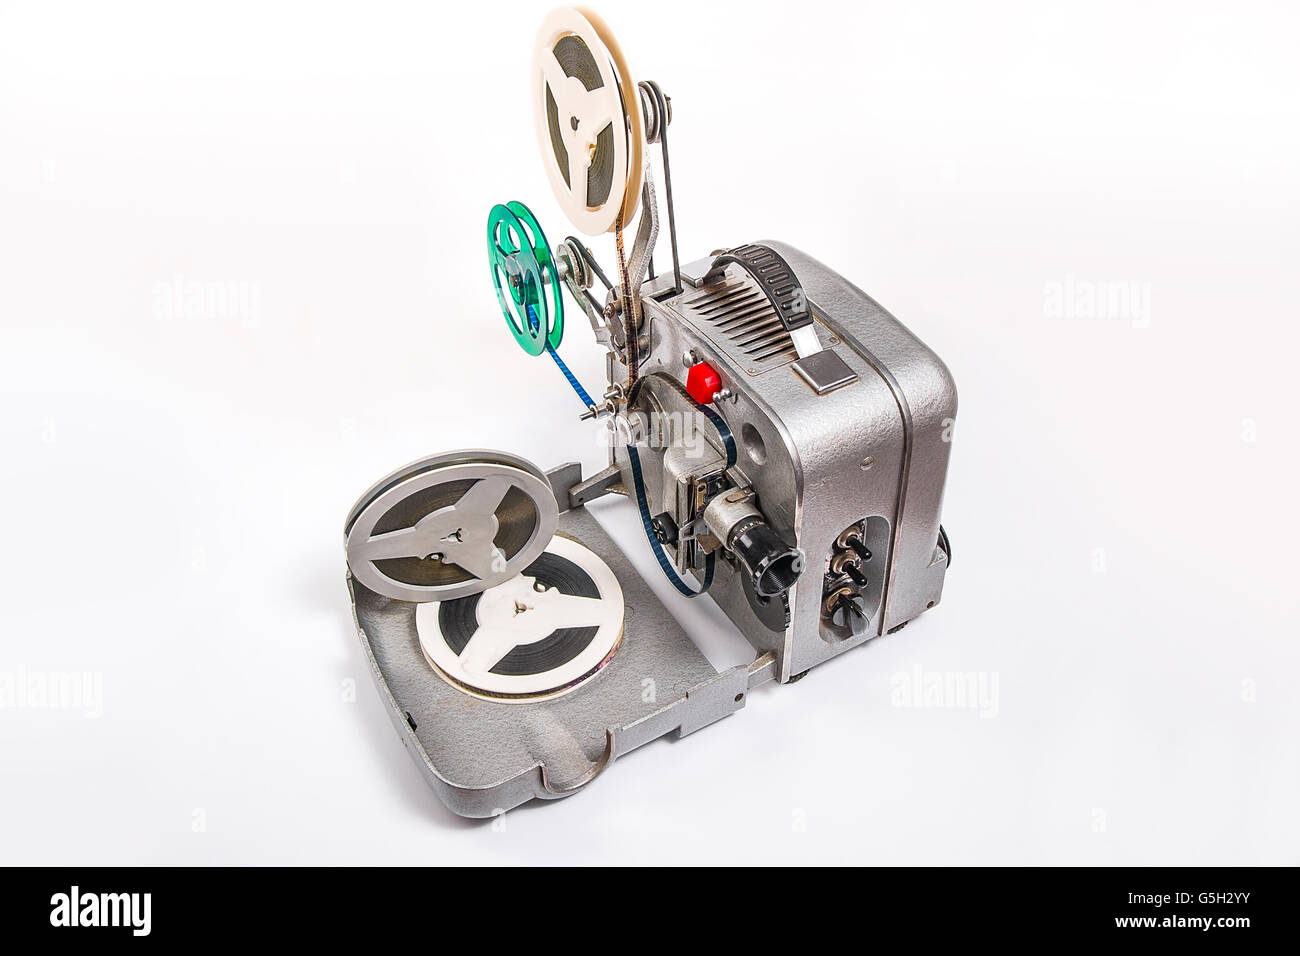 Retro old reel movie projector for cinema. A reels of motion